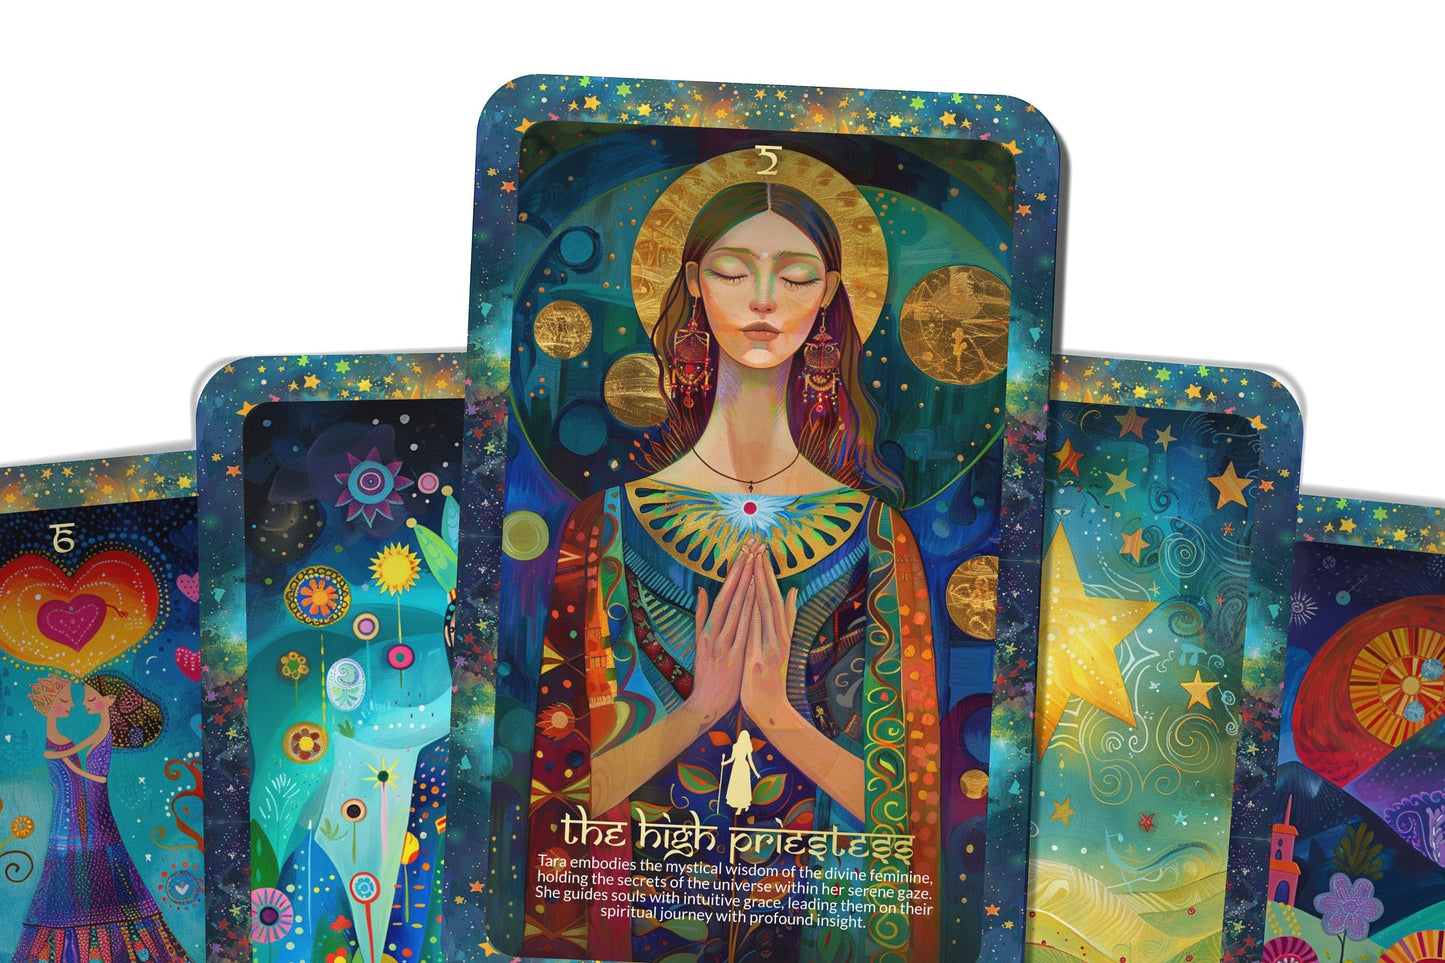 The Tarot of Tara - Major Arcana - A unique spiritual journey - Hindu goddess of compassion and liberation, guide towards enlightenment.